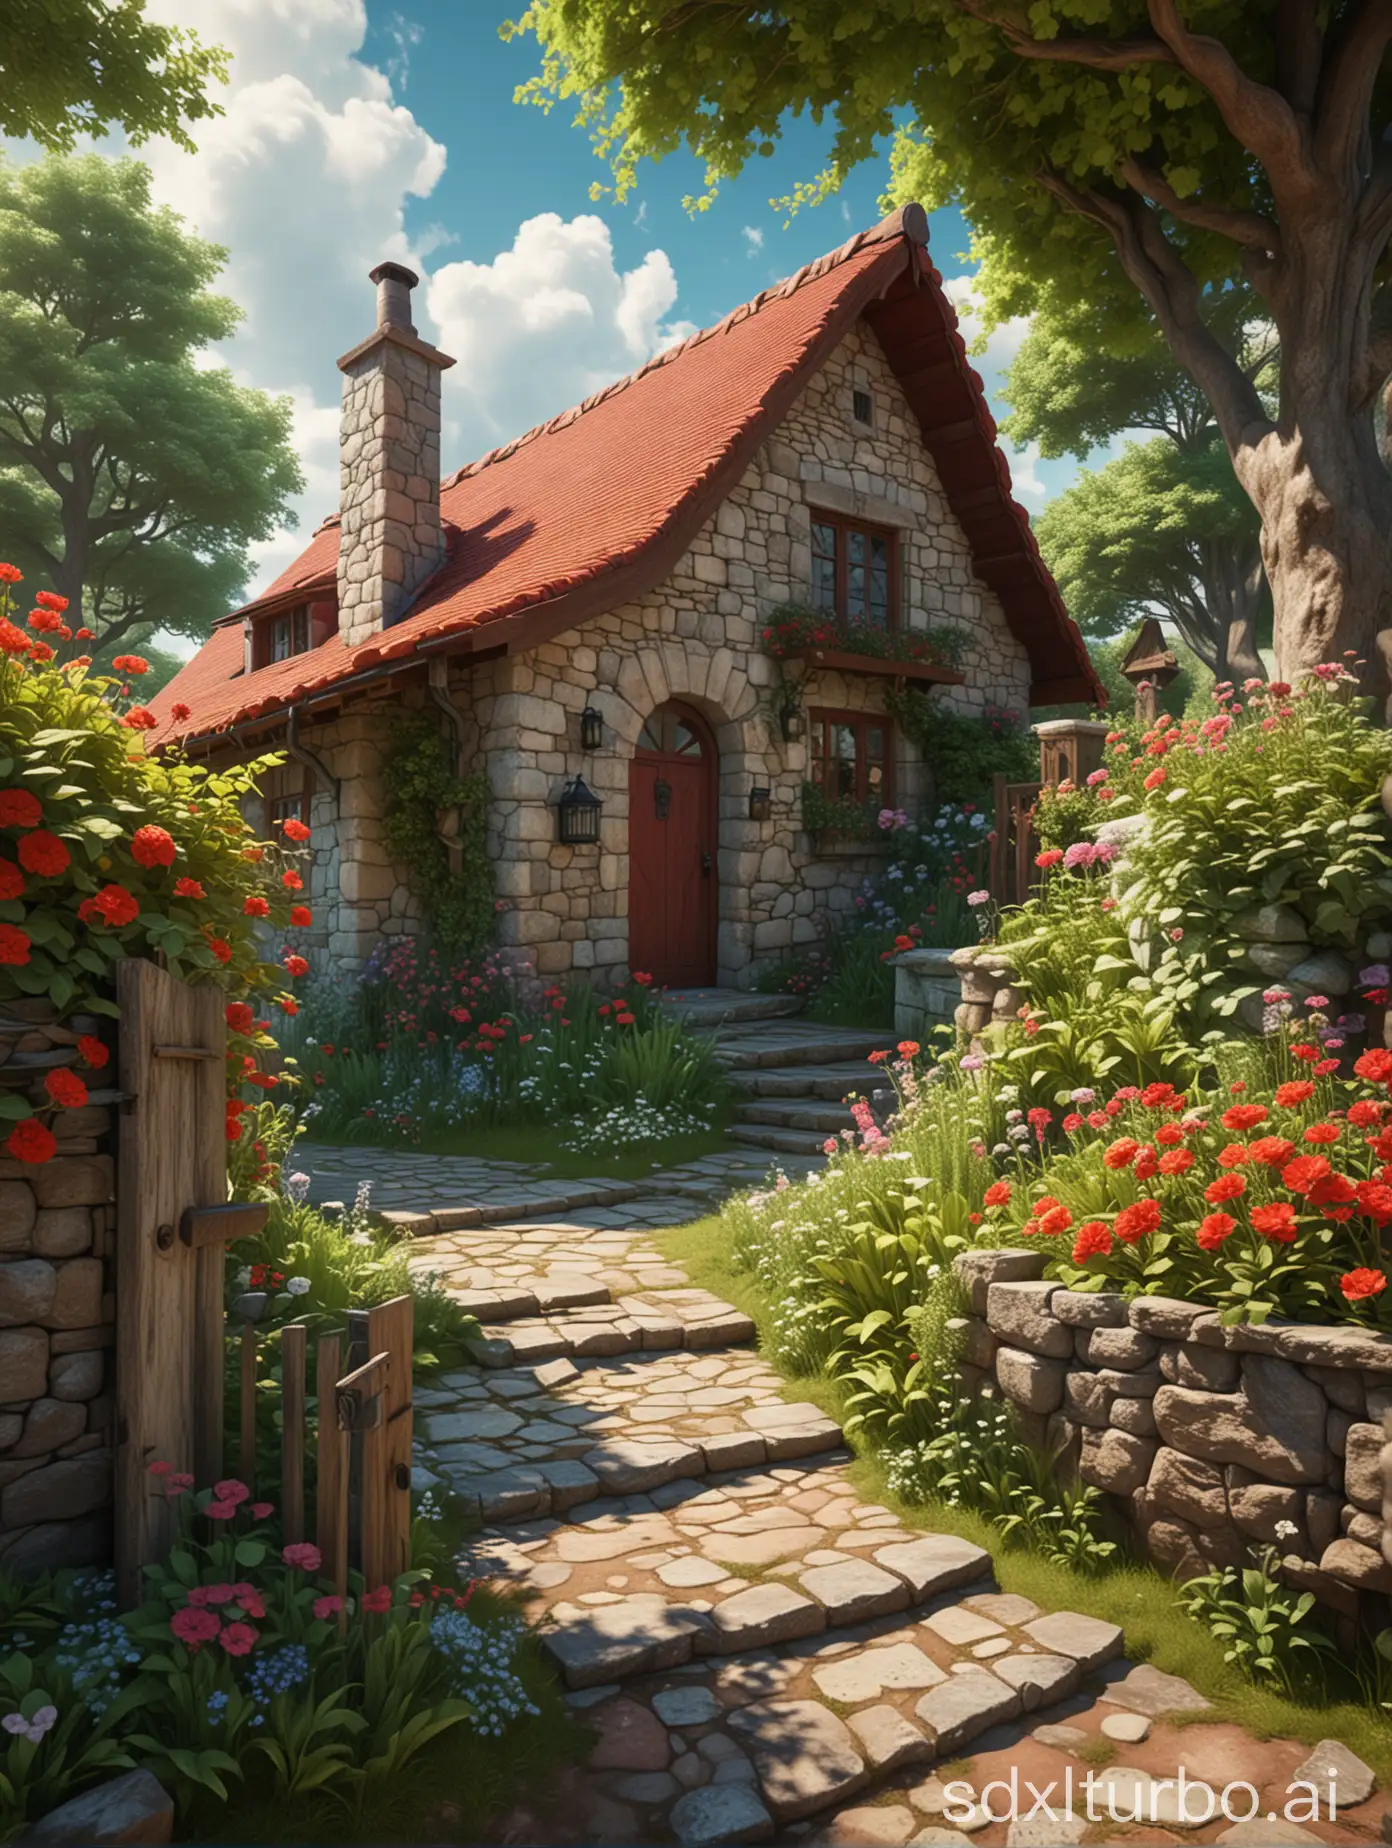 Illustration of a charming stone cottage with a red-tiled roof, surrounded by lush greenery and colorful flowers. A stone pathway leads to the wooden door of the cottage, and large trees with dense foliage frame the scene. Bright daylight and fluffy clouds create a serene and picturesque atmosphere.strong shadows,unreal engine